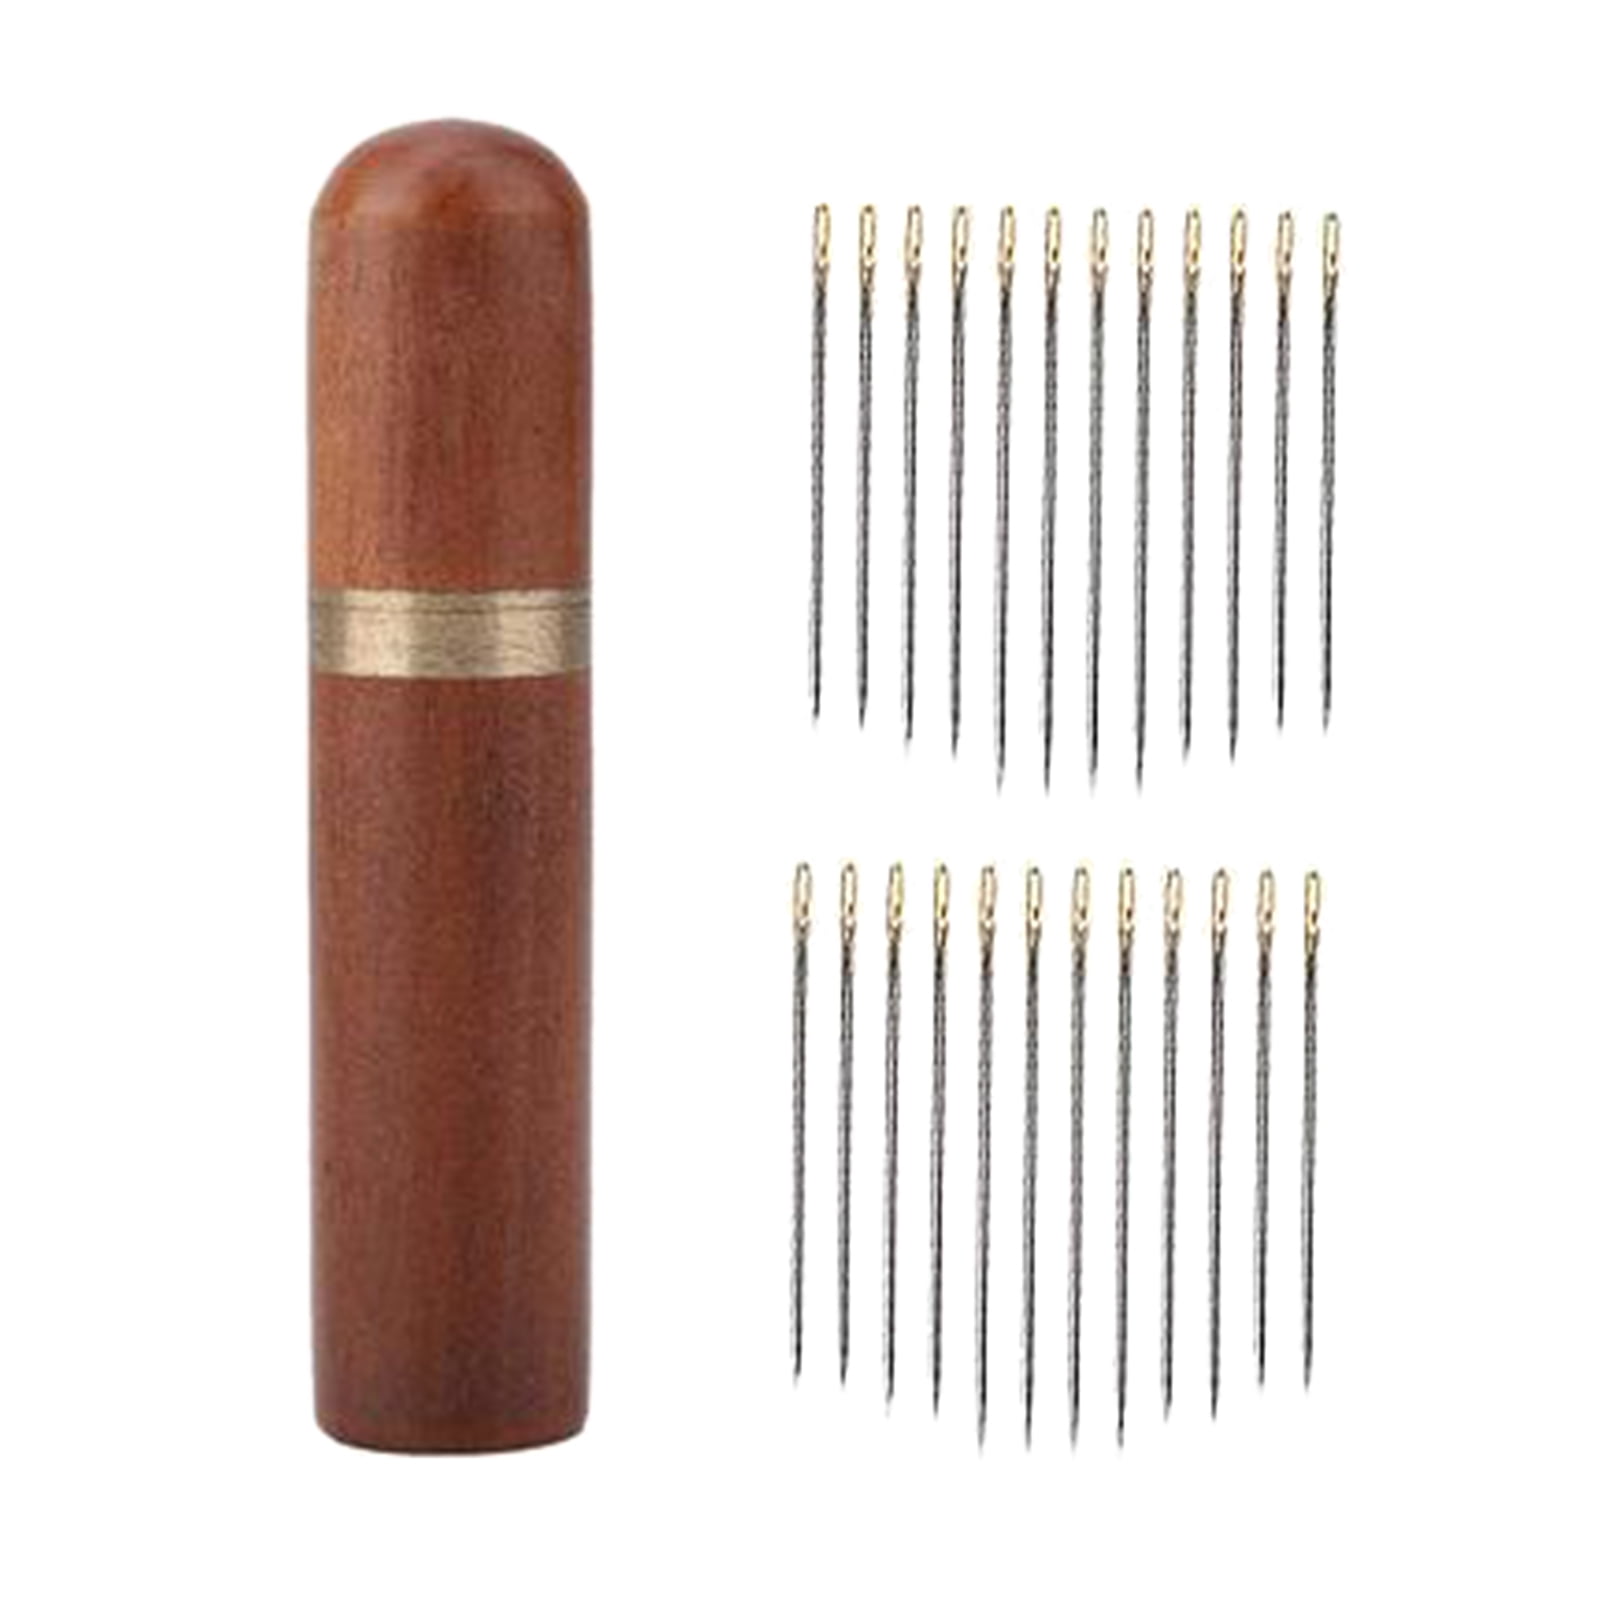 24PCS Self Threading Needles Sewing Needles Stitching Pins in 3 Sizes Easy Threading Needle Side Hand Sewing with a Wooden Needle Case 